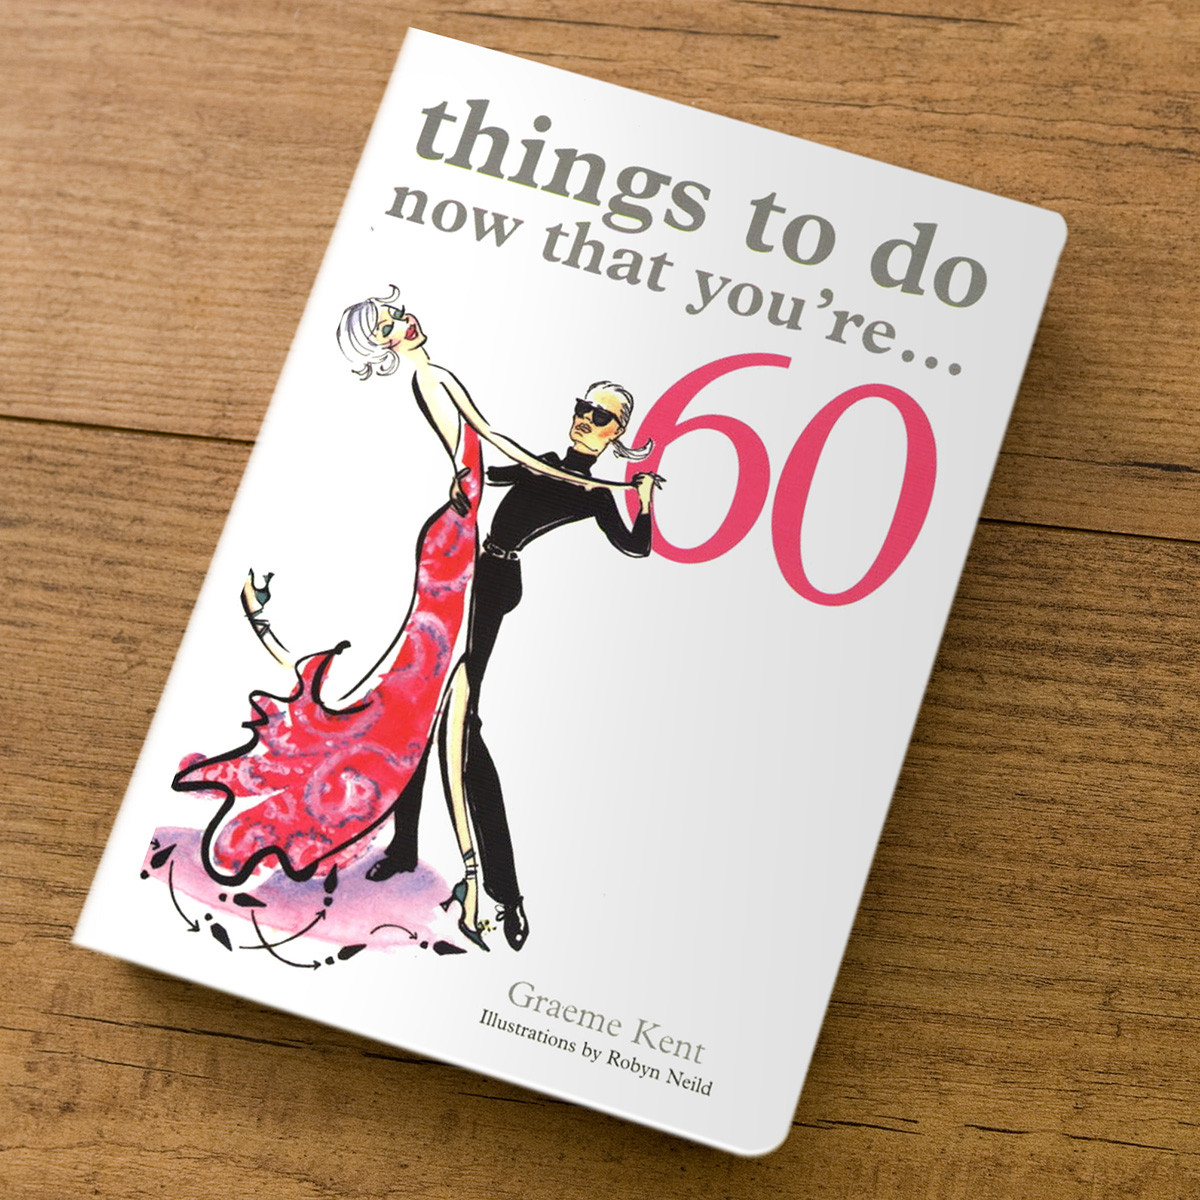 Gift Ideas For Womans 60Th Birthday
 Things To Do Now That You re 60 Gift Book 60th